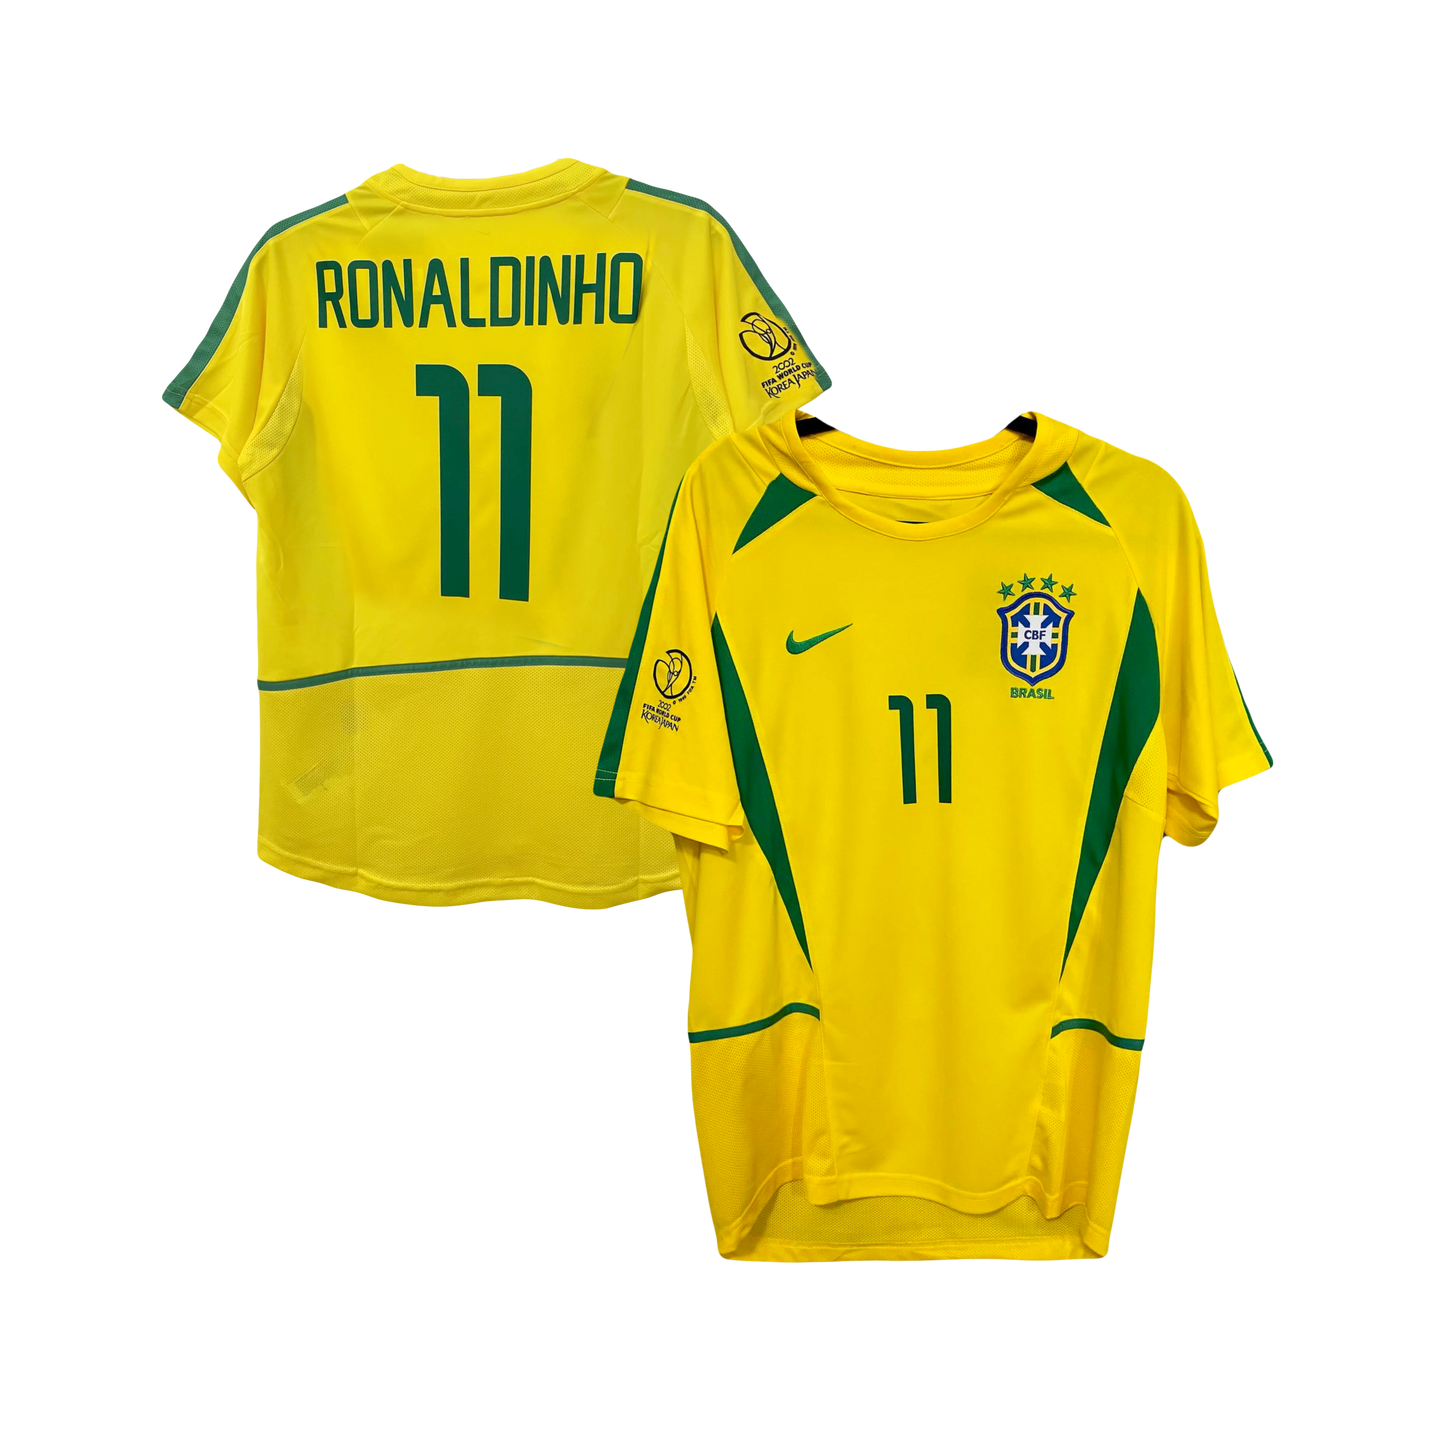 Ronaldinho Brazil National Soccer Team 2002 Korea World Cup Classic Iconic Authentic Nike Home Player Jersey - Yellow